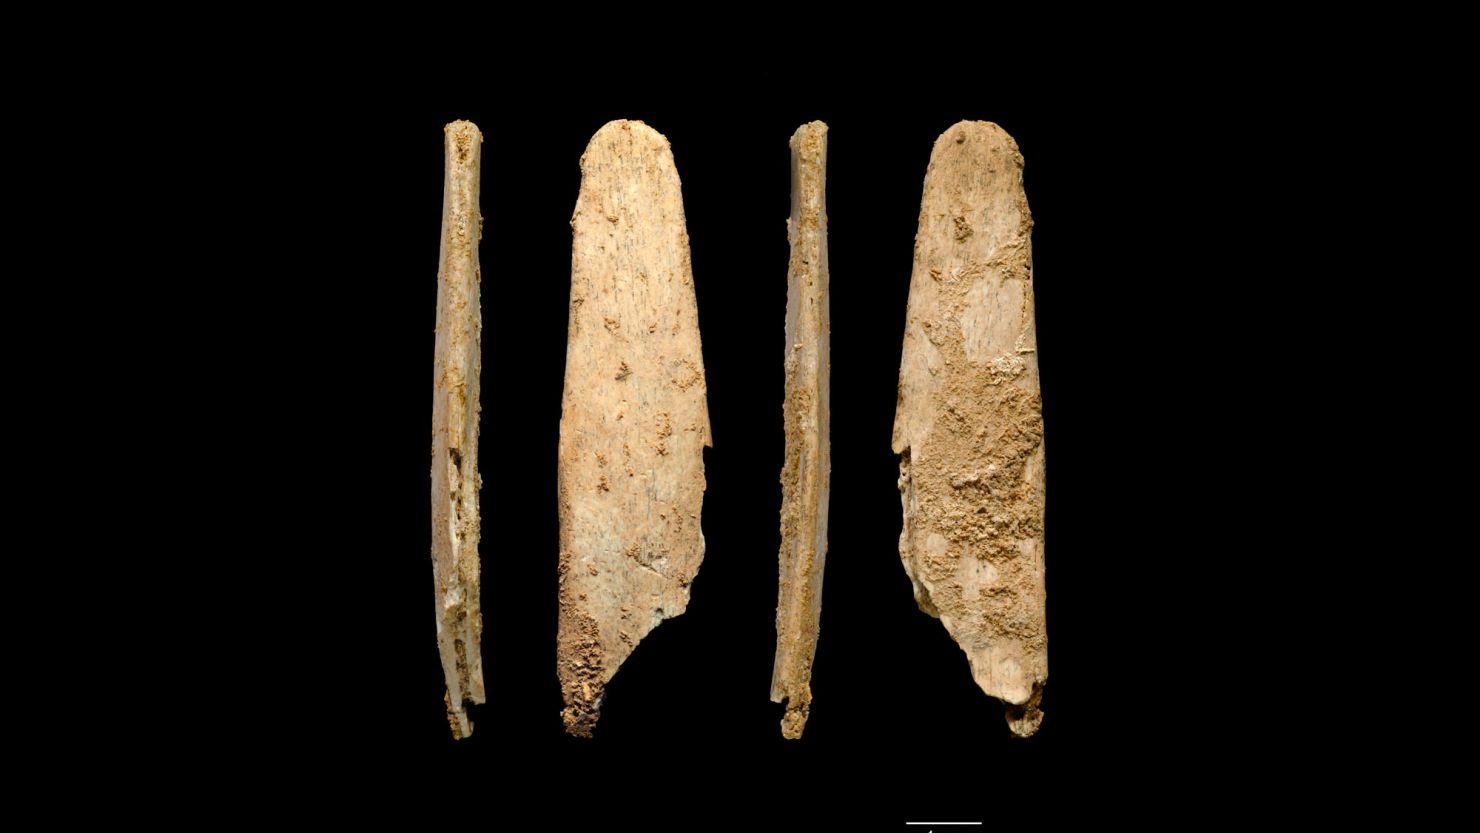 These are four views of the most complete lissoir bone tool found during excavations at the Neanderthal site of Abri Peyrony, France.